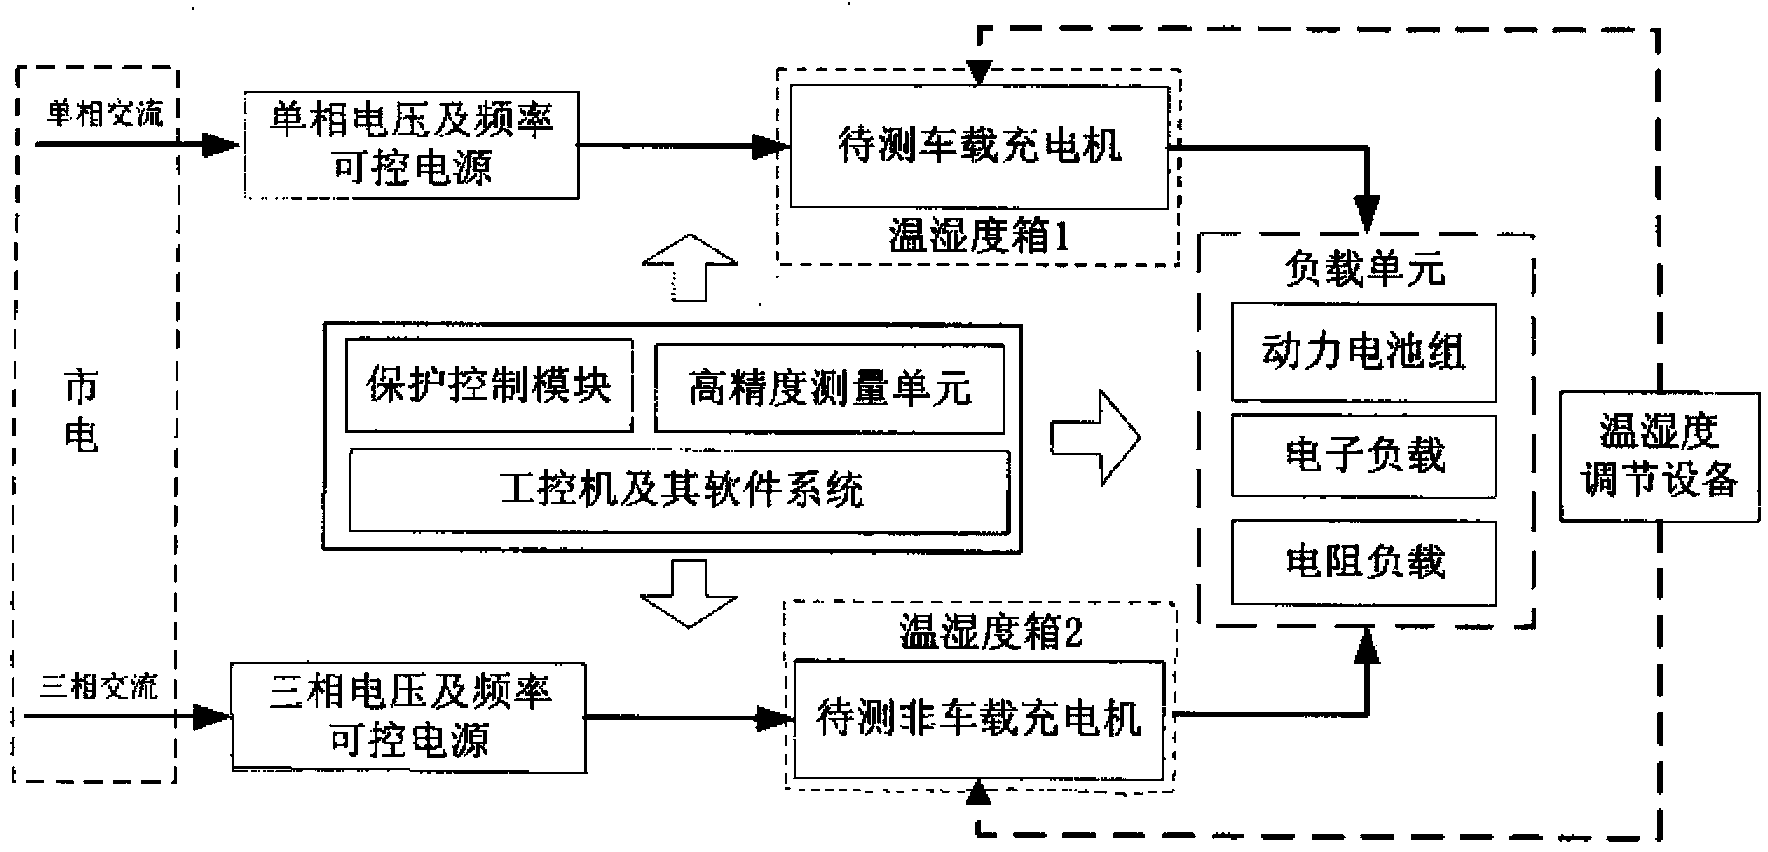 Multiple-working-condition automatic testing experiment system of electric vehicle charging equipment